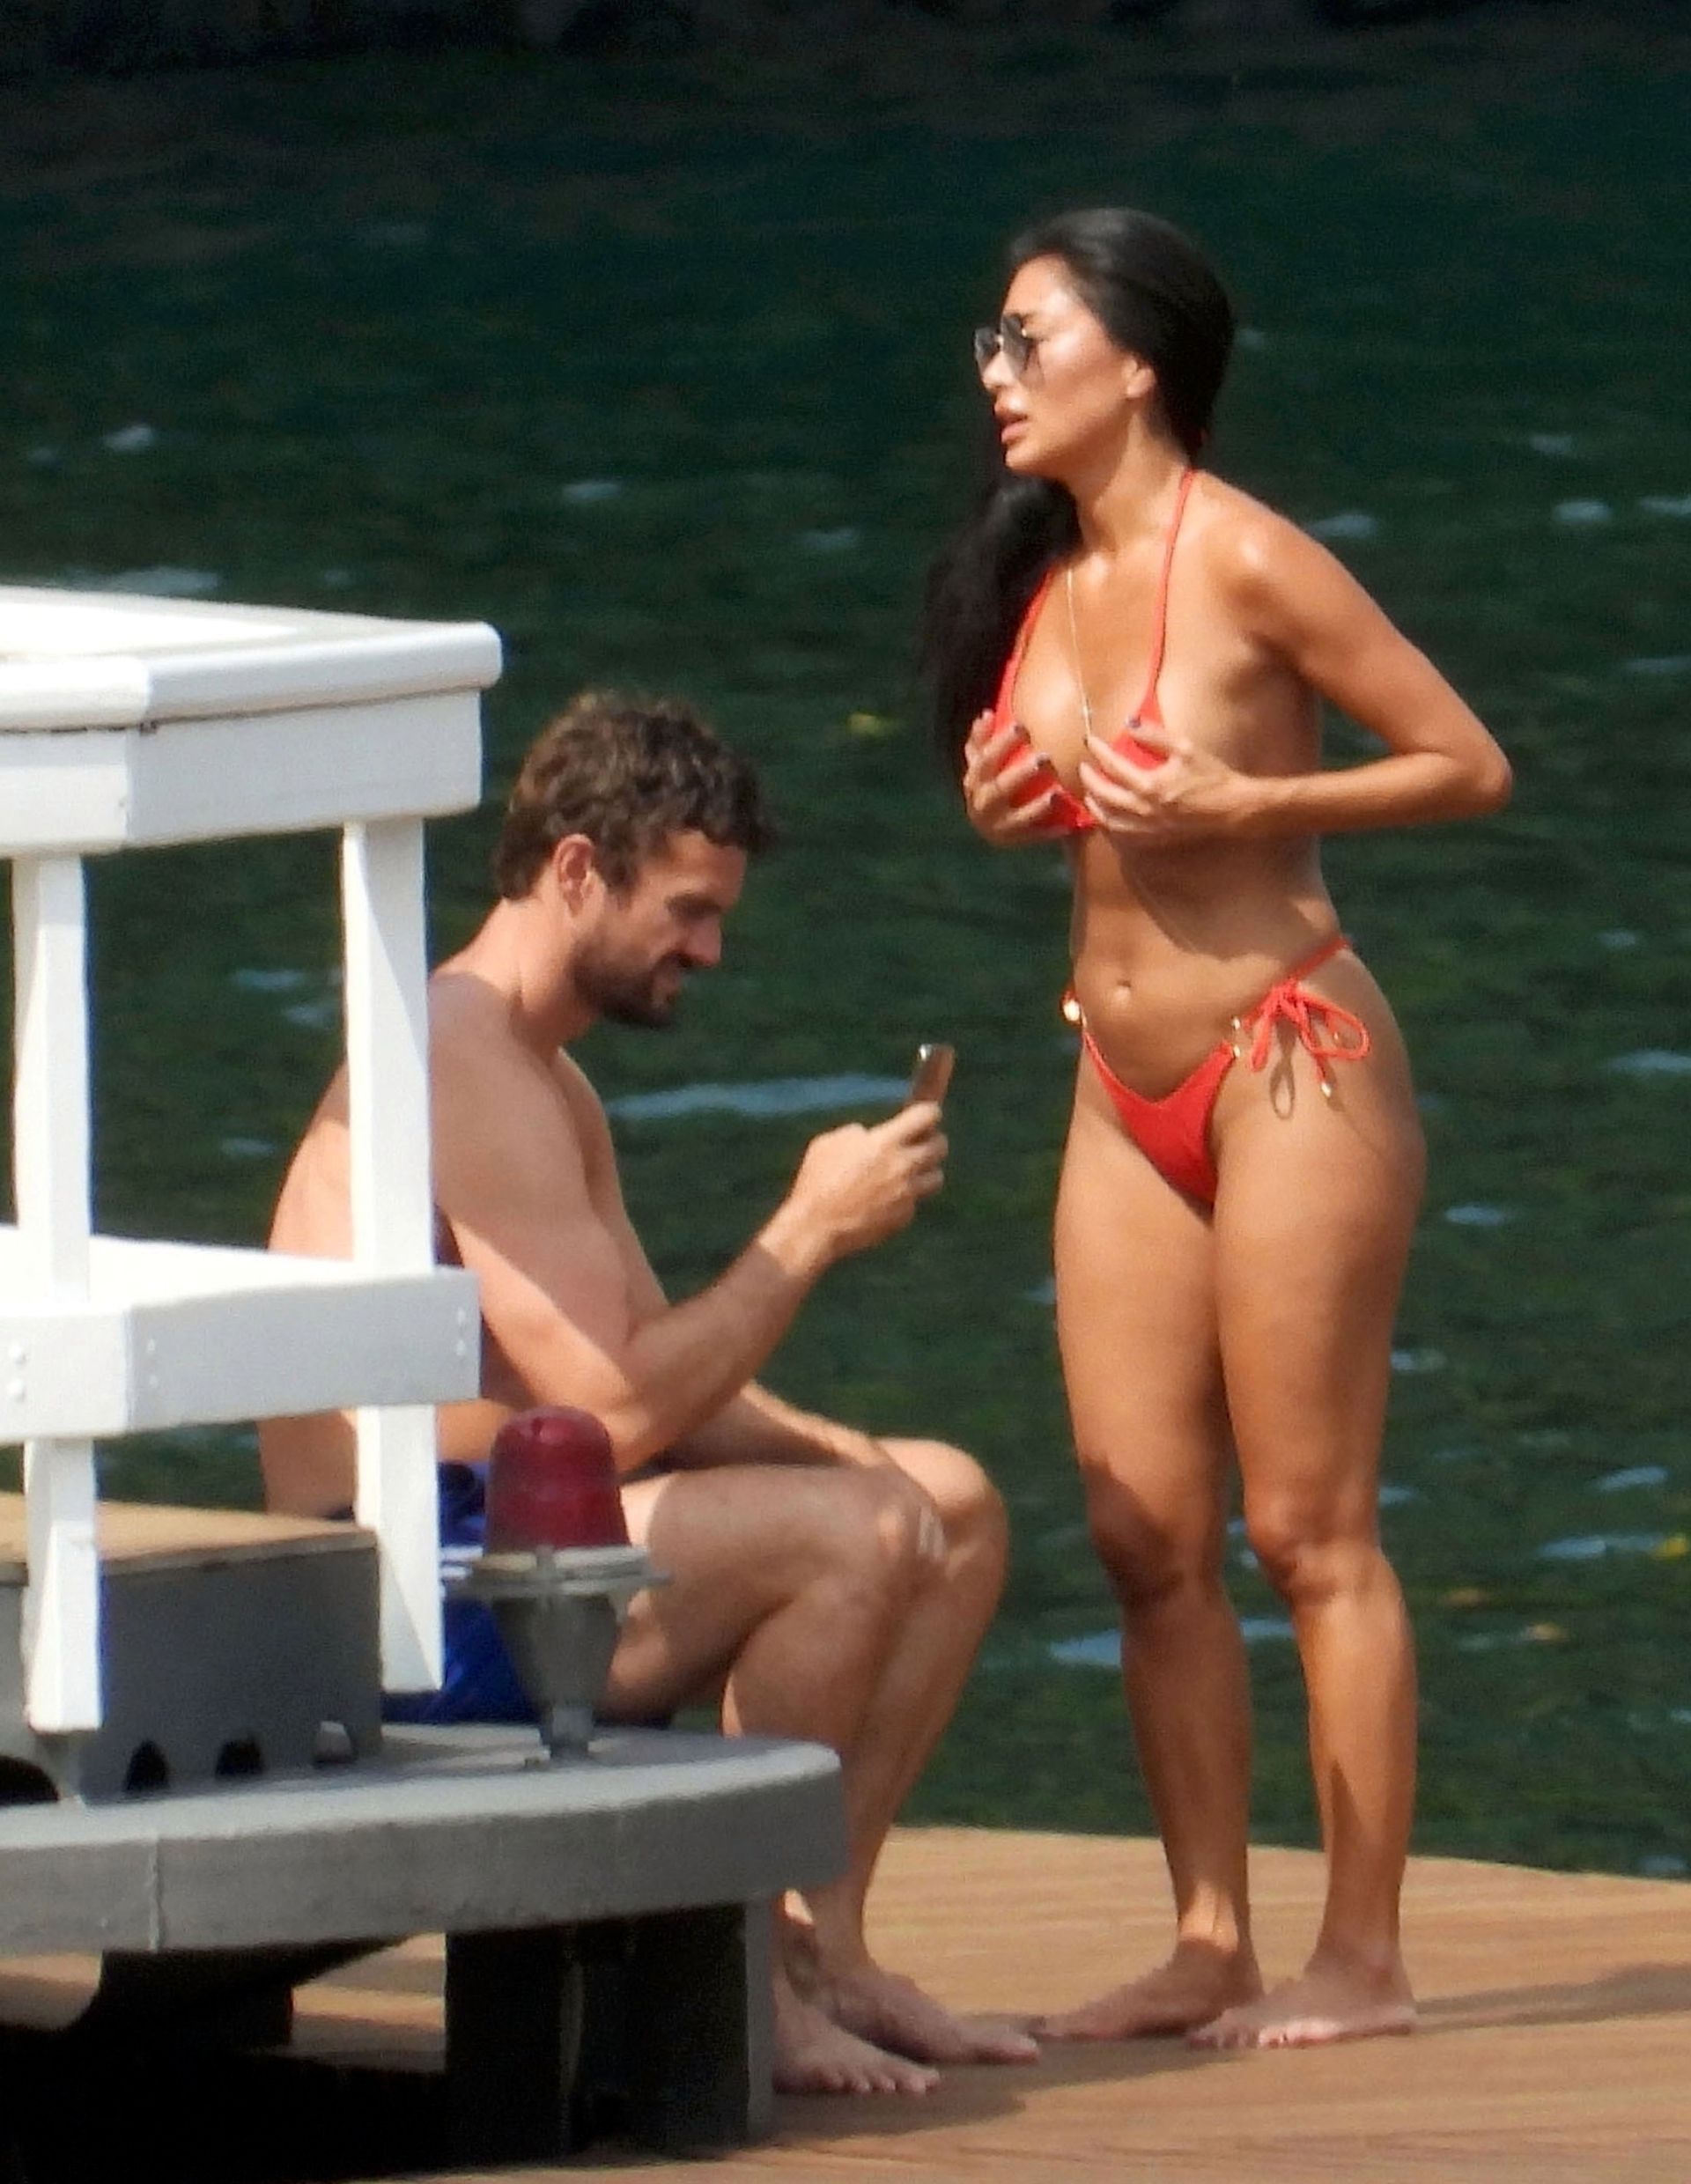 Nicole Scherzinger Fantastic Boobs and Ass in Red Thong Bikini in Italy pics